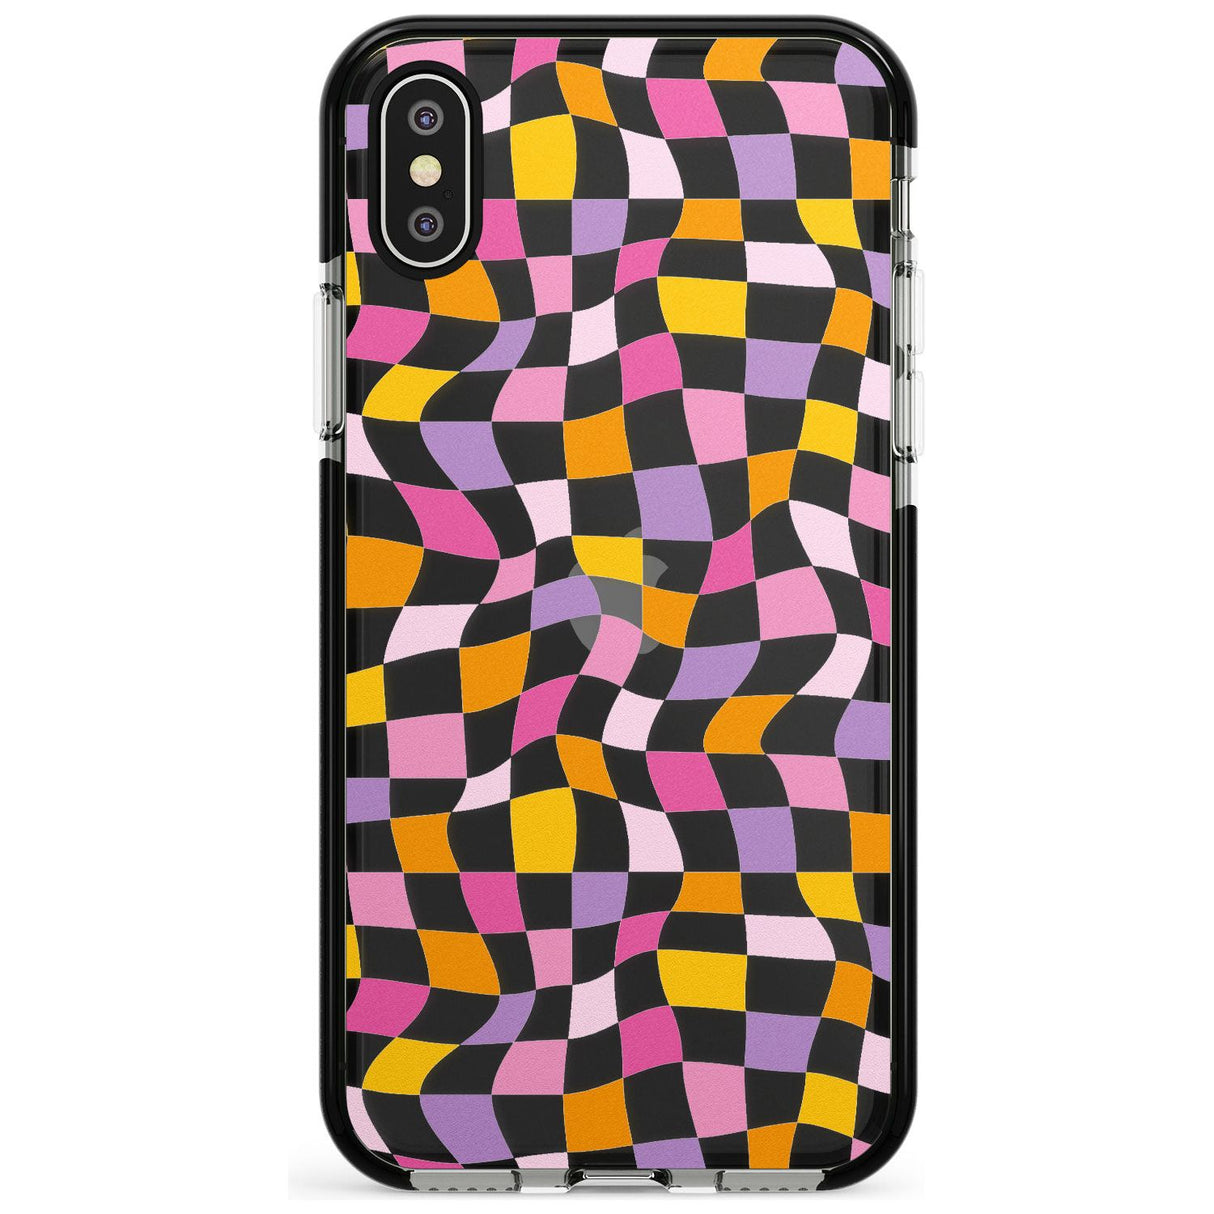 Wonky Squares Pattern Black Impact Phone Case for iPhone X XS Max XR